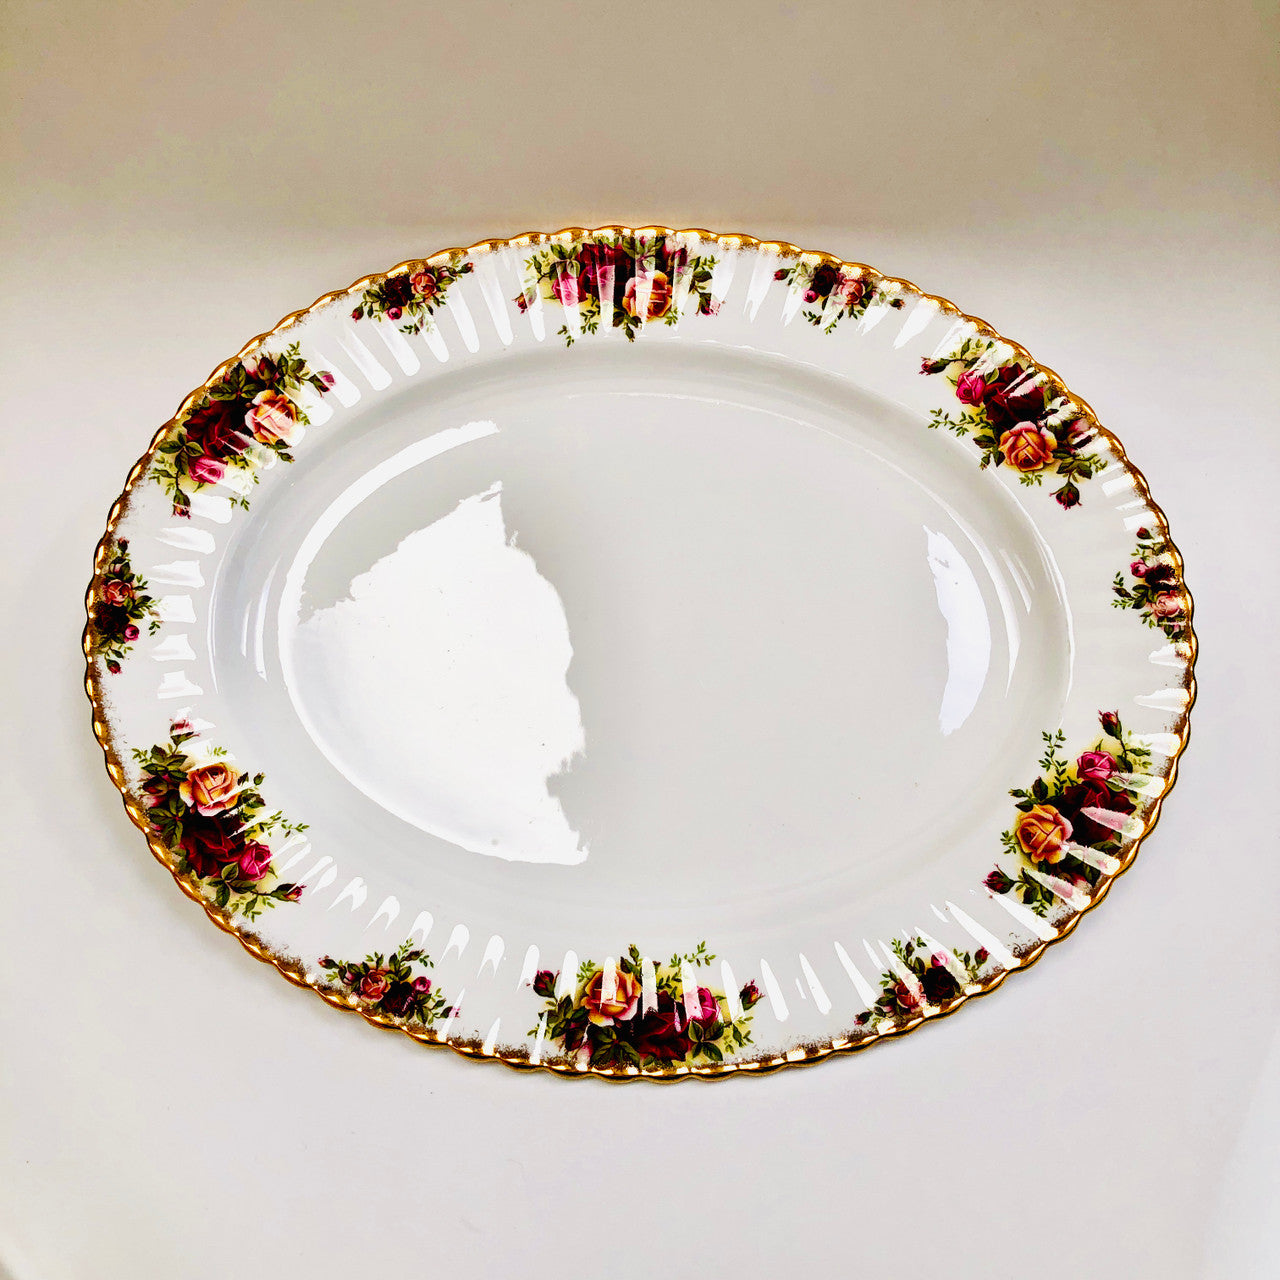 Royal Albert, Old Country Roses, Oval, Platter, Tray, 15", Serving, Vintage, Red, Roses, England,  Steampunk